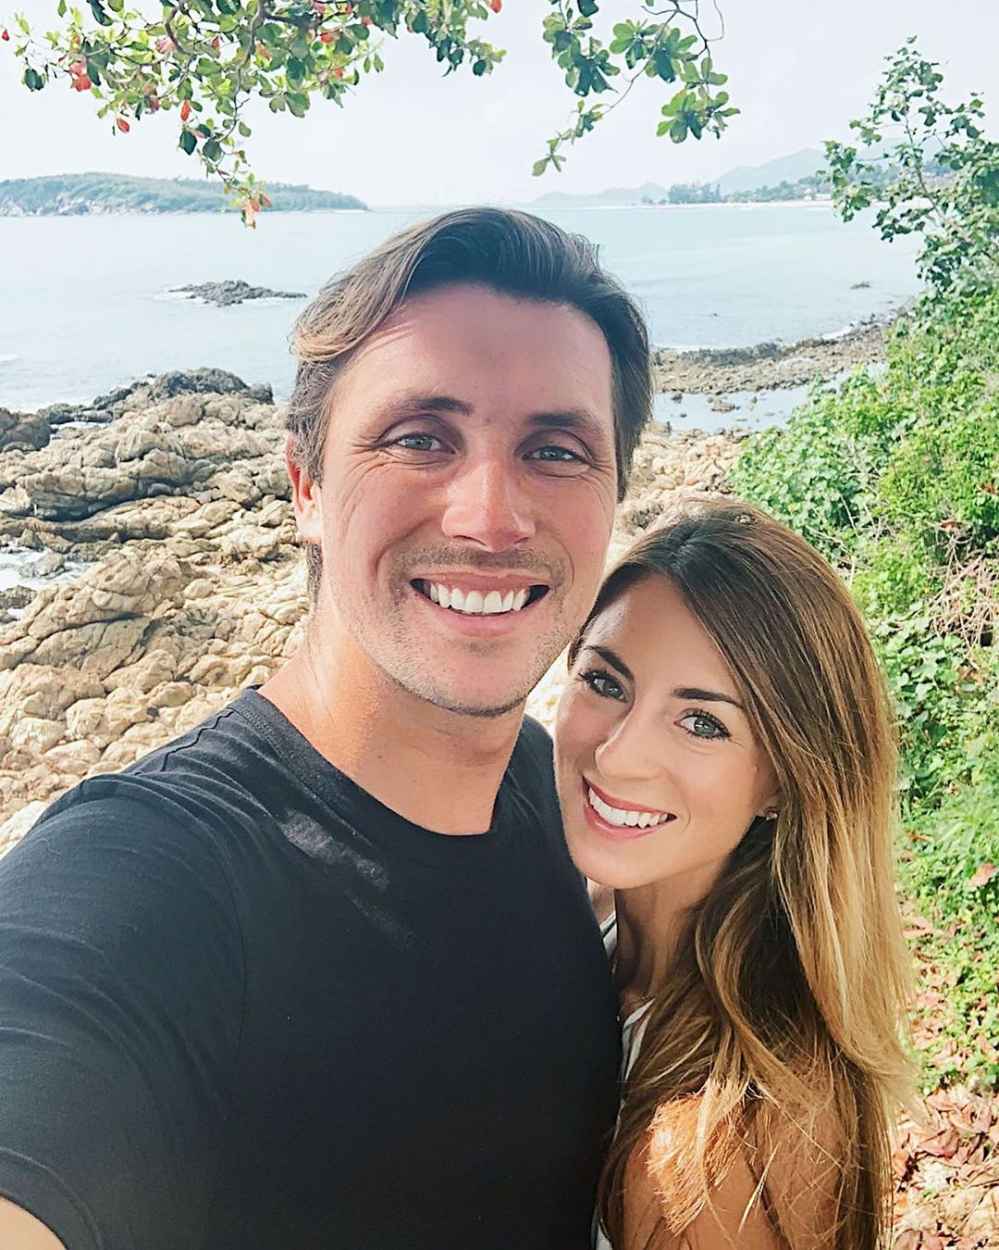 Bachelor Alum Tenley Molzahn Gives Birth and Welcomes First Child With Husband Taylor Leopold